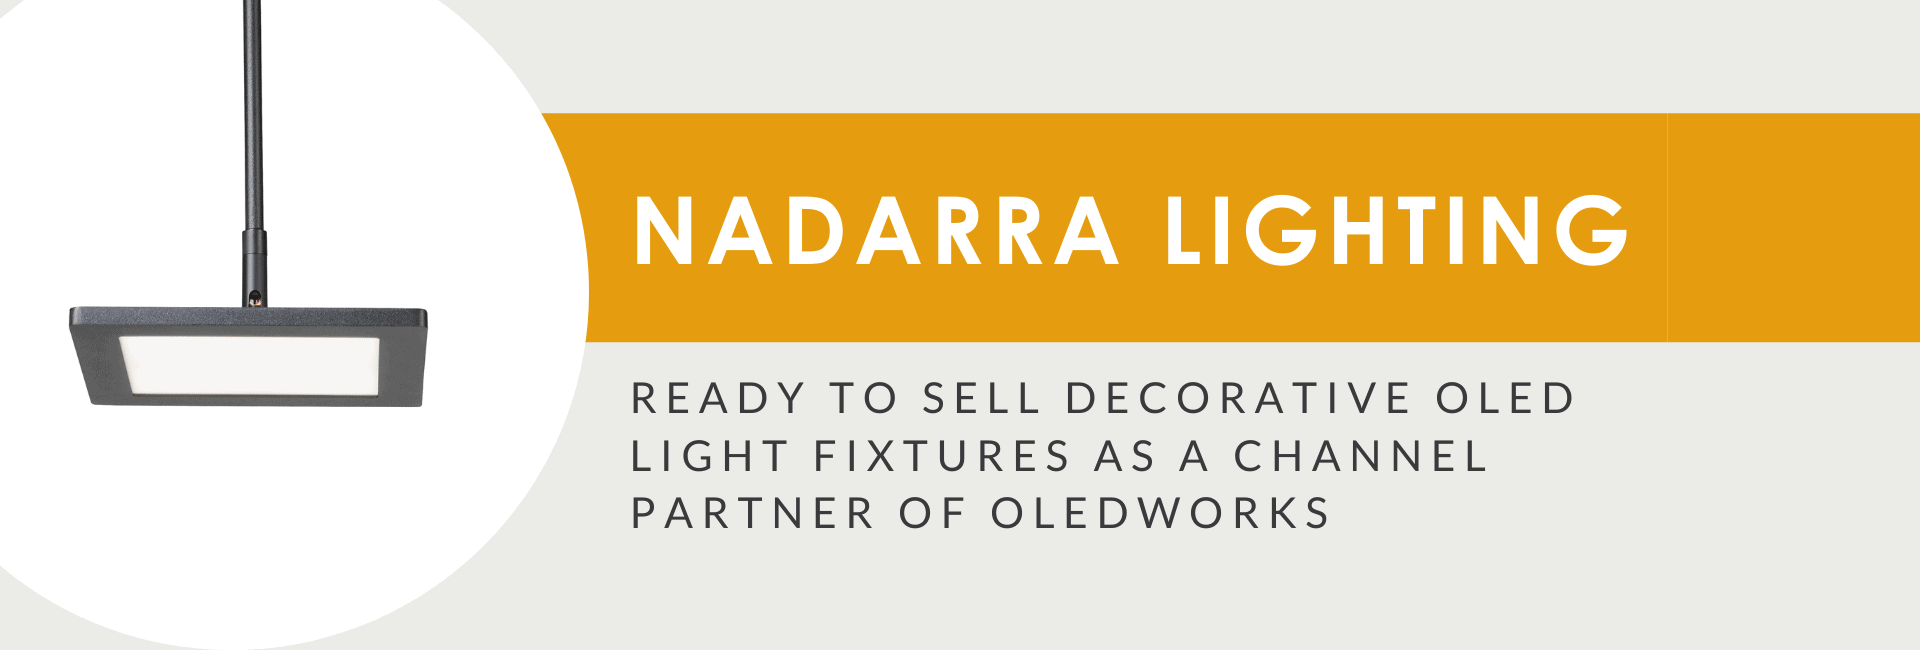 Rochester-based Nadarra Lighting, Ready to Sell Decorative OLED Light Fixtures as a Channel Partner of OLEDWorks